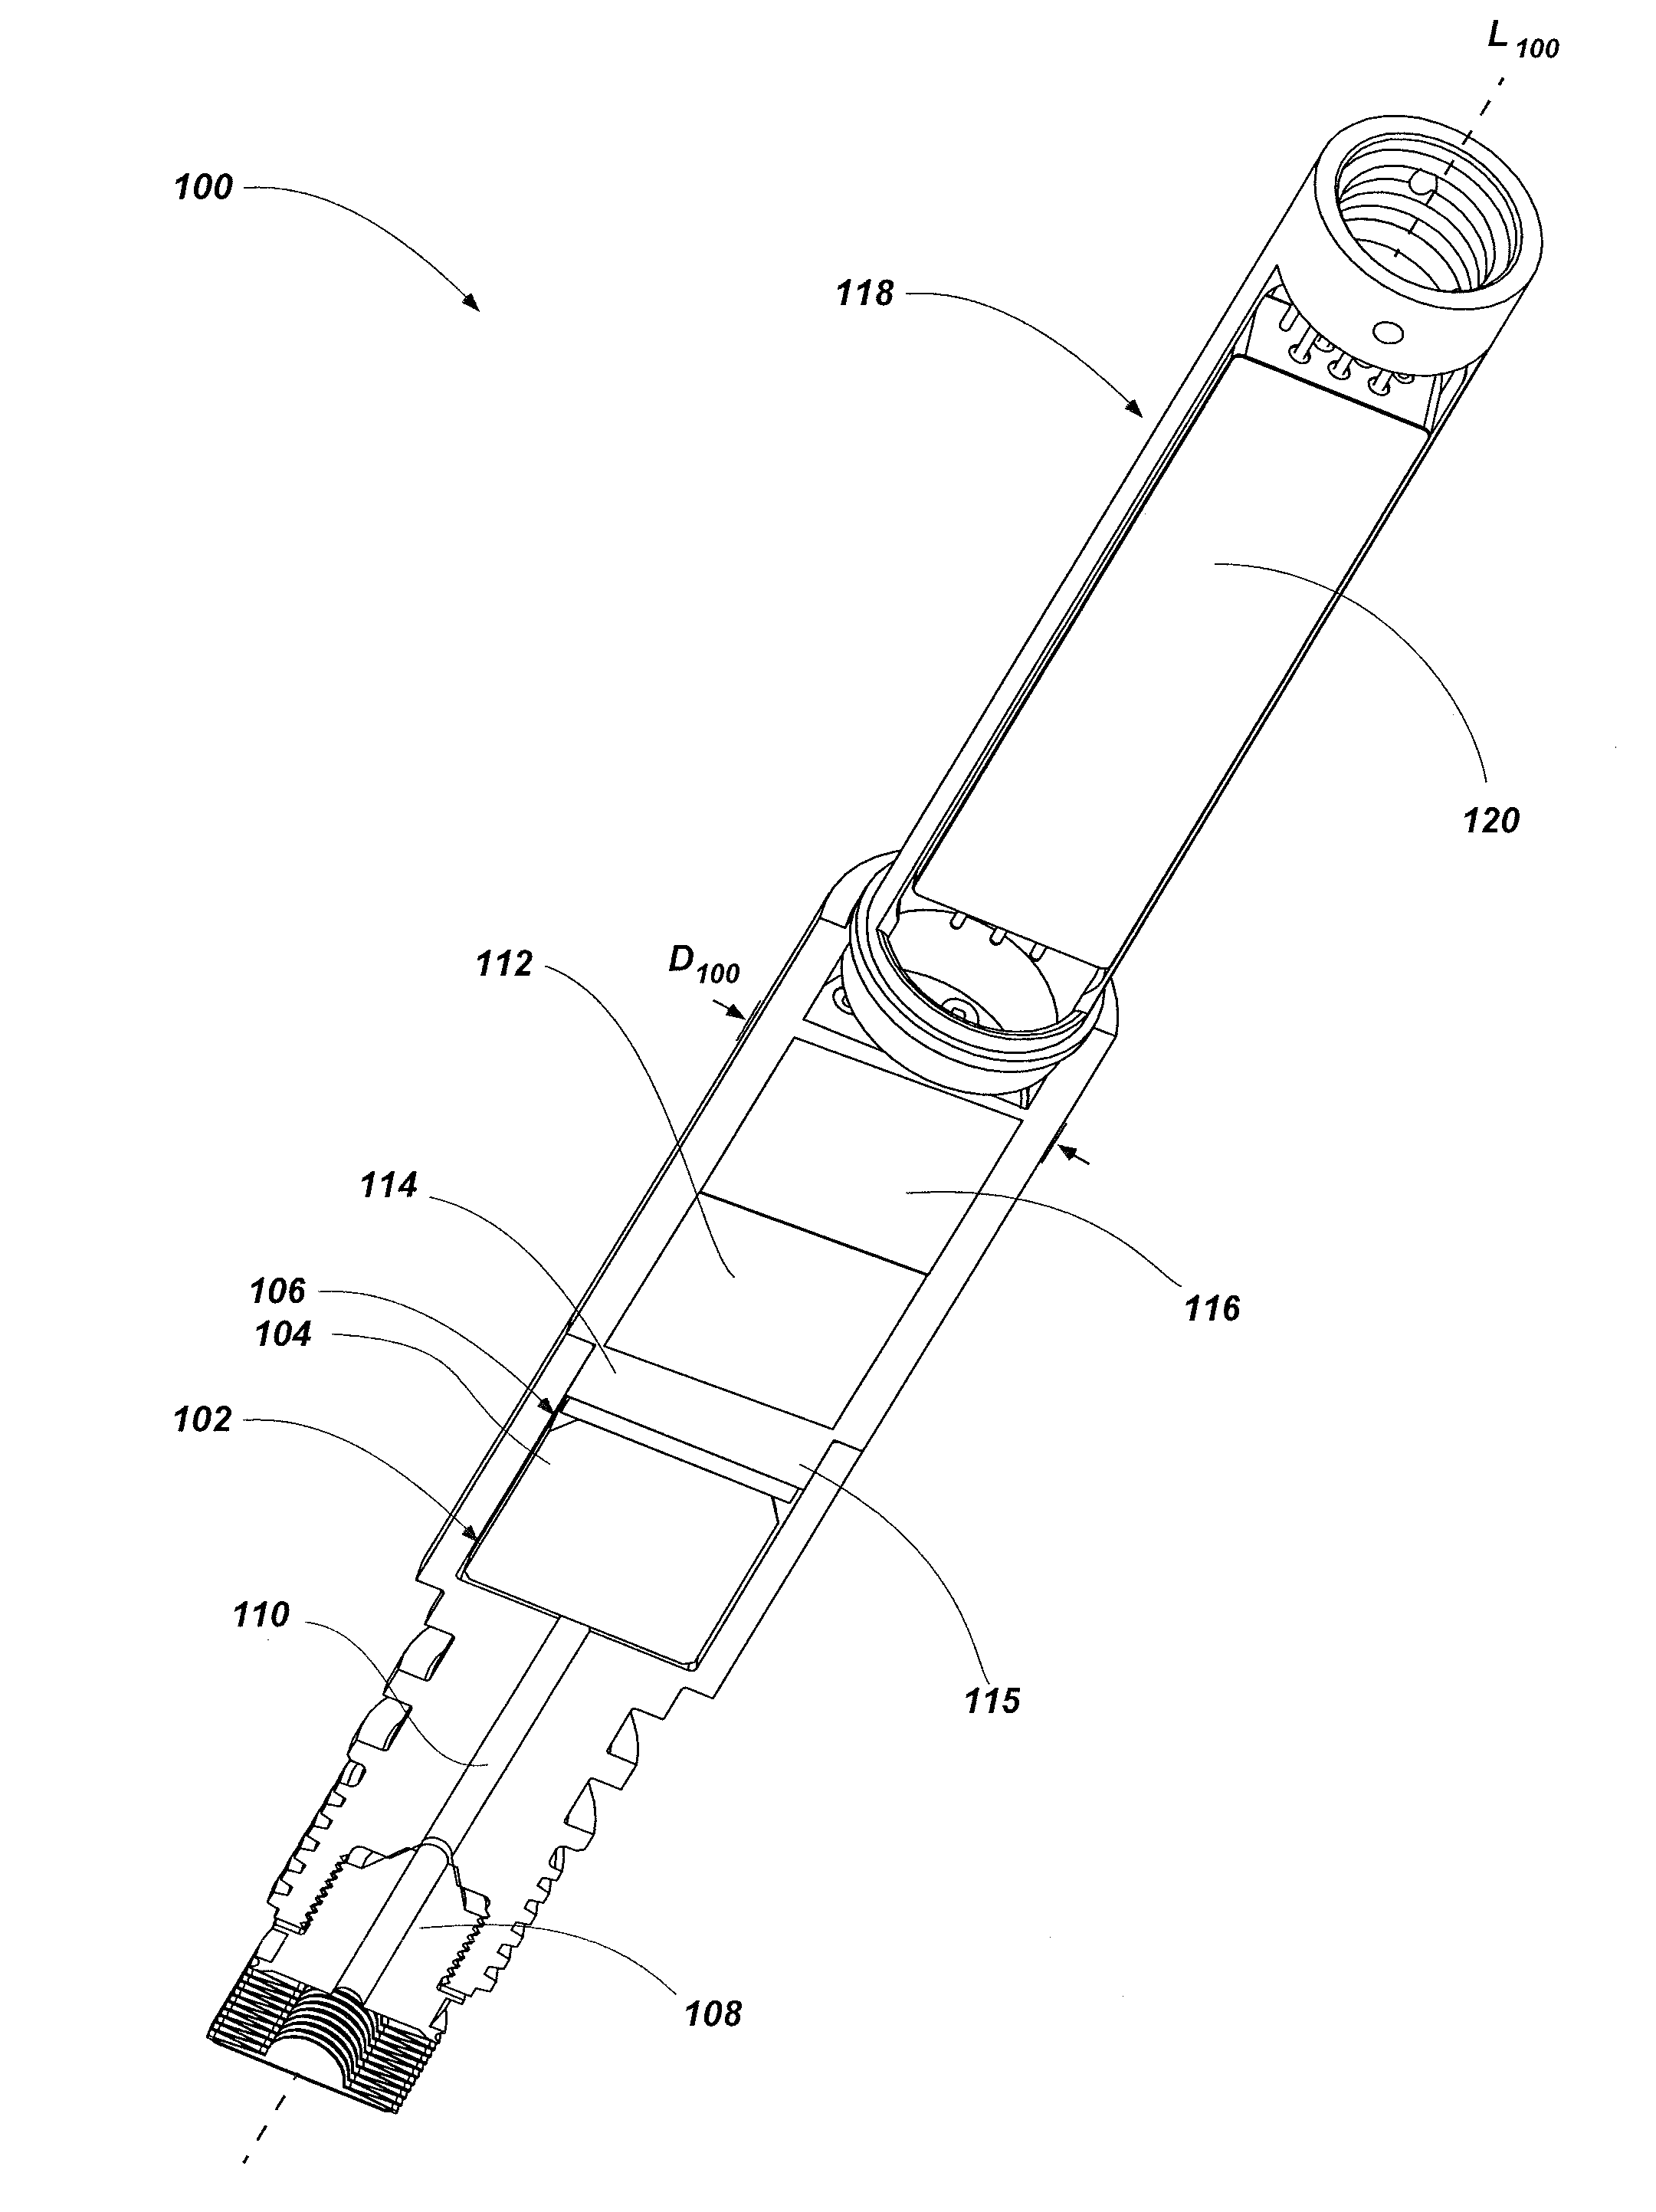 Sensors for measuring at least one of pressure and temperature, and related assemblies and methods